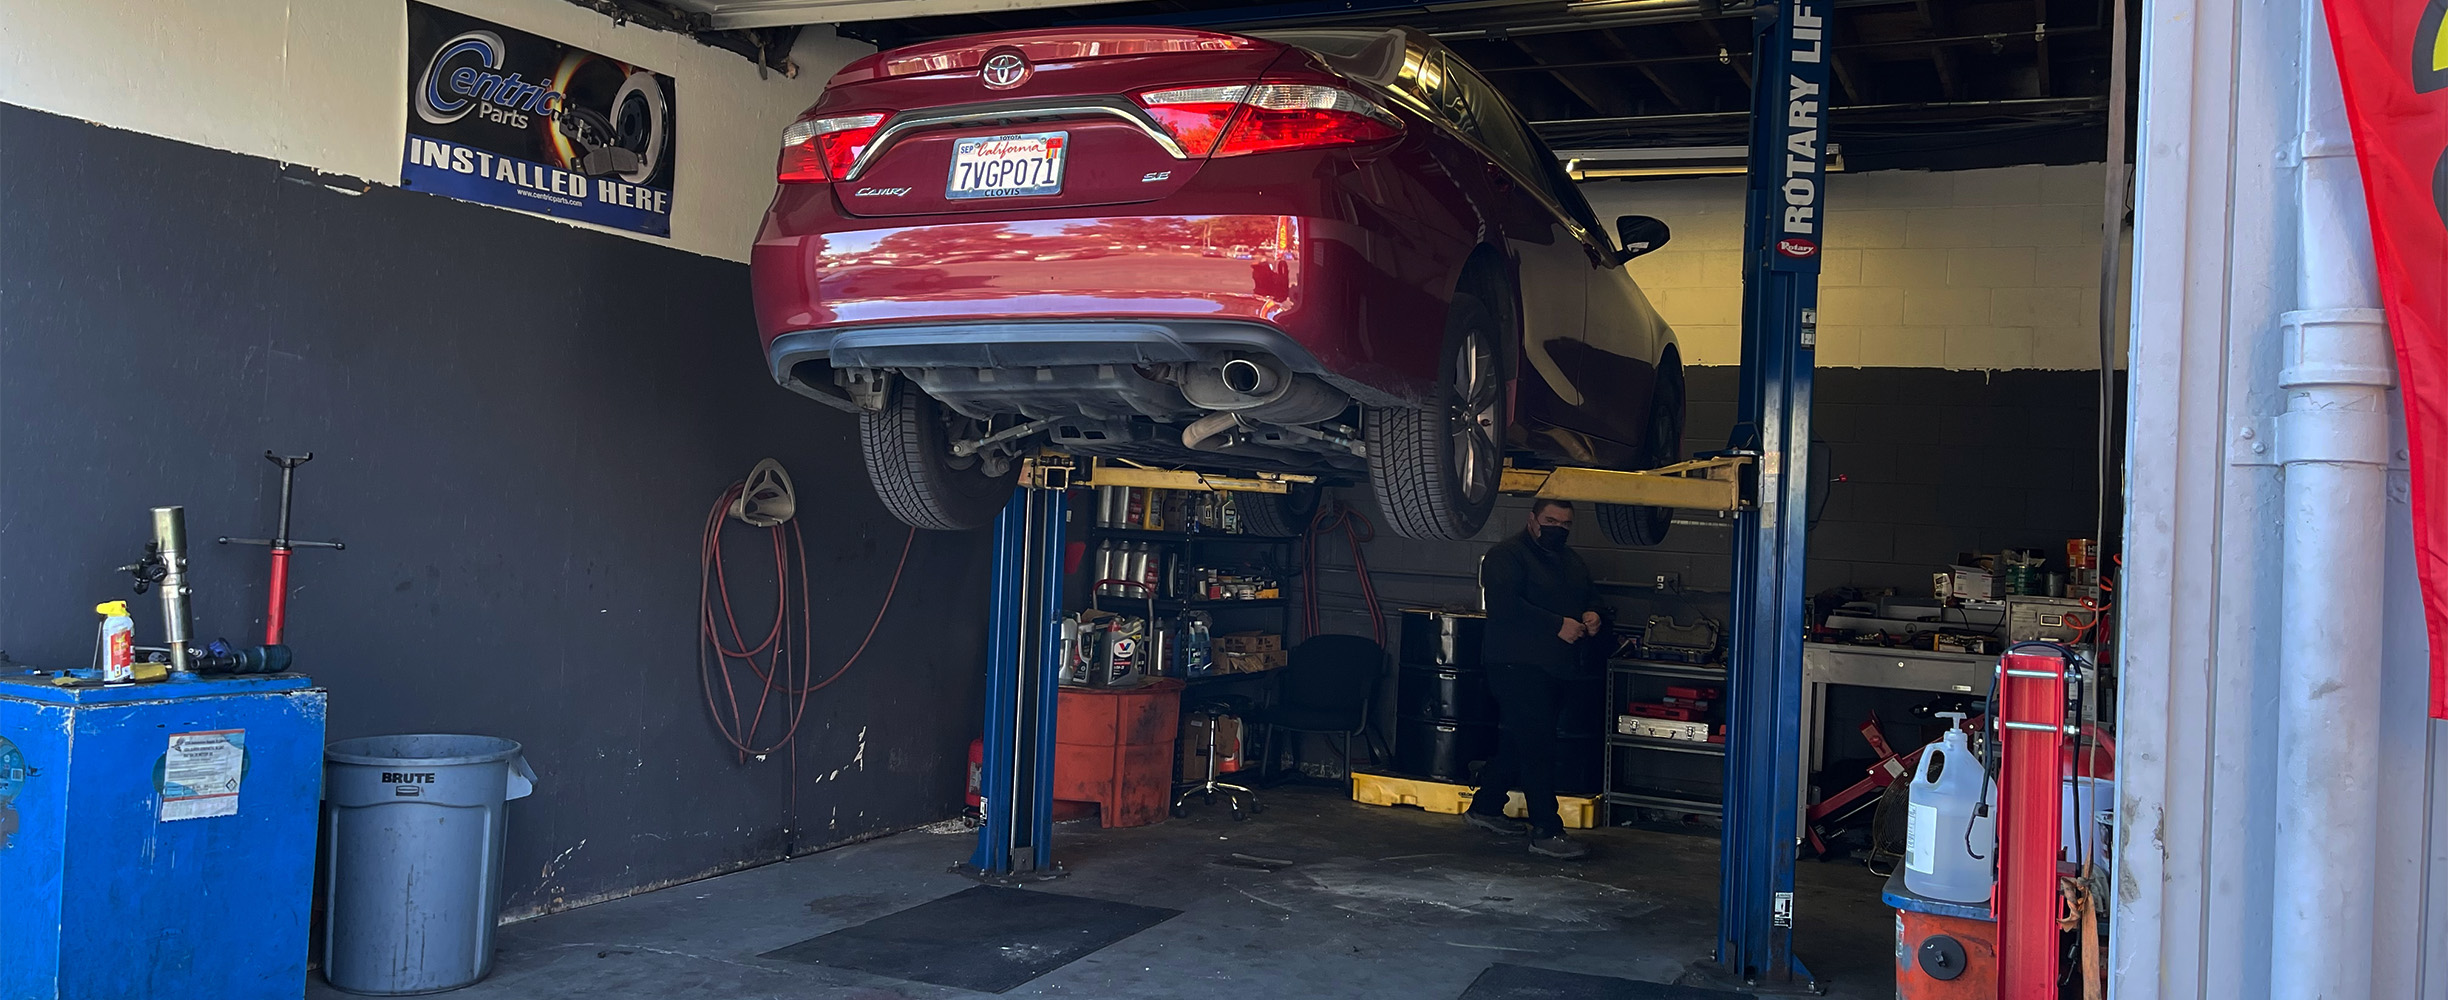 Tires service including new tires, balancing, repair, shock absorbers, brakes and more in Sunnyvale, California.